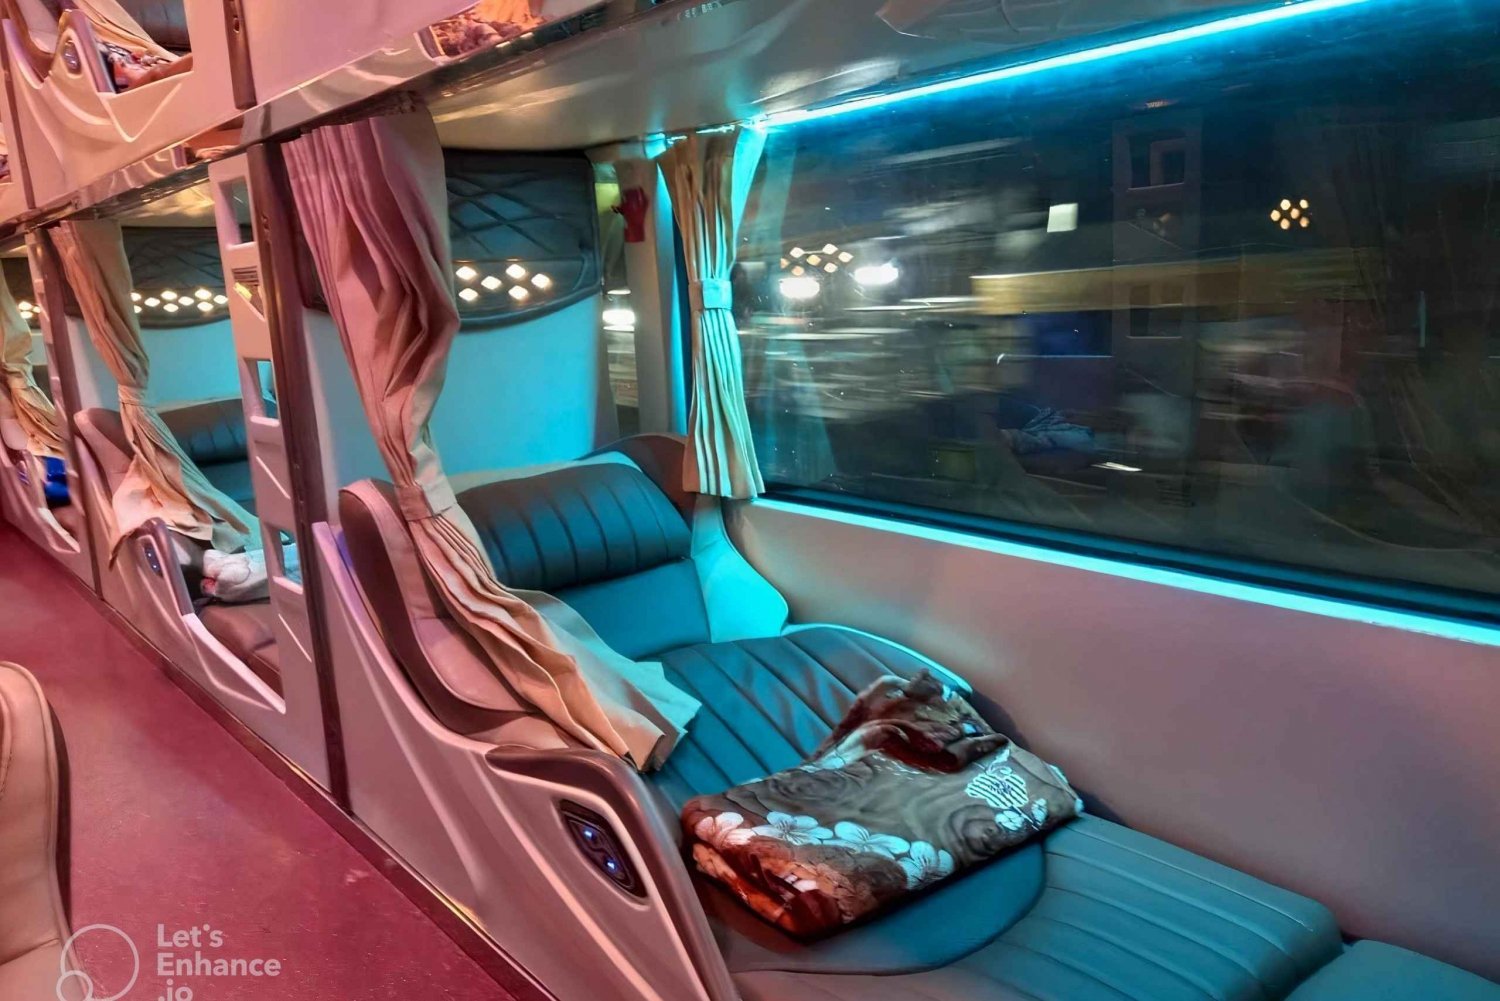 From Ho Chi Minh: Sleeper Bus to Mui Ne with Bed and Water